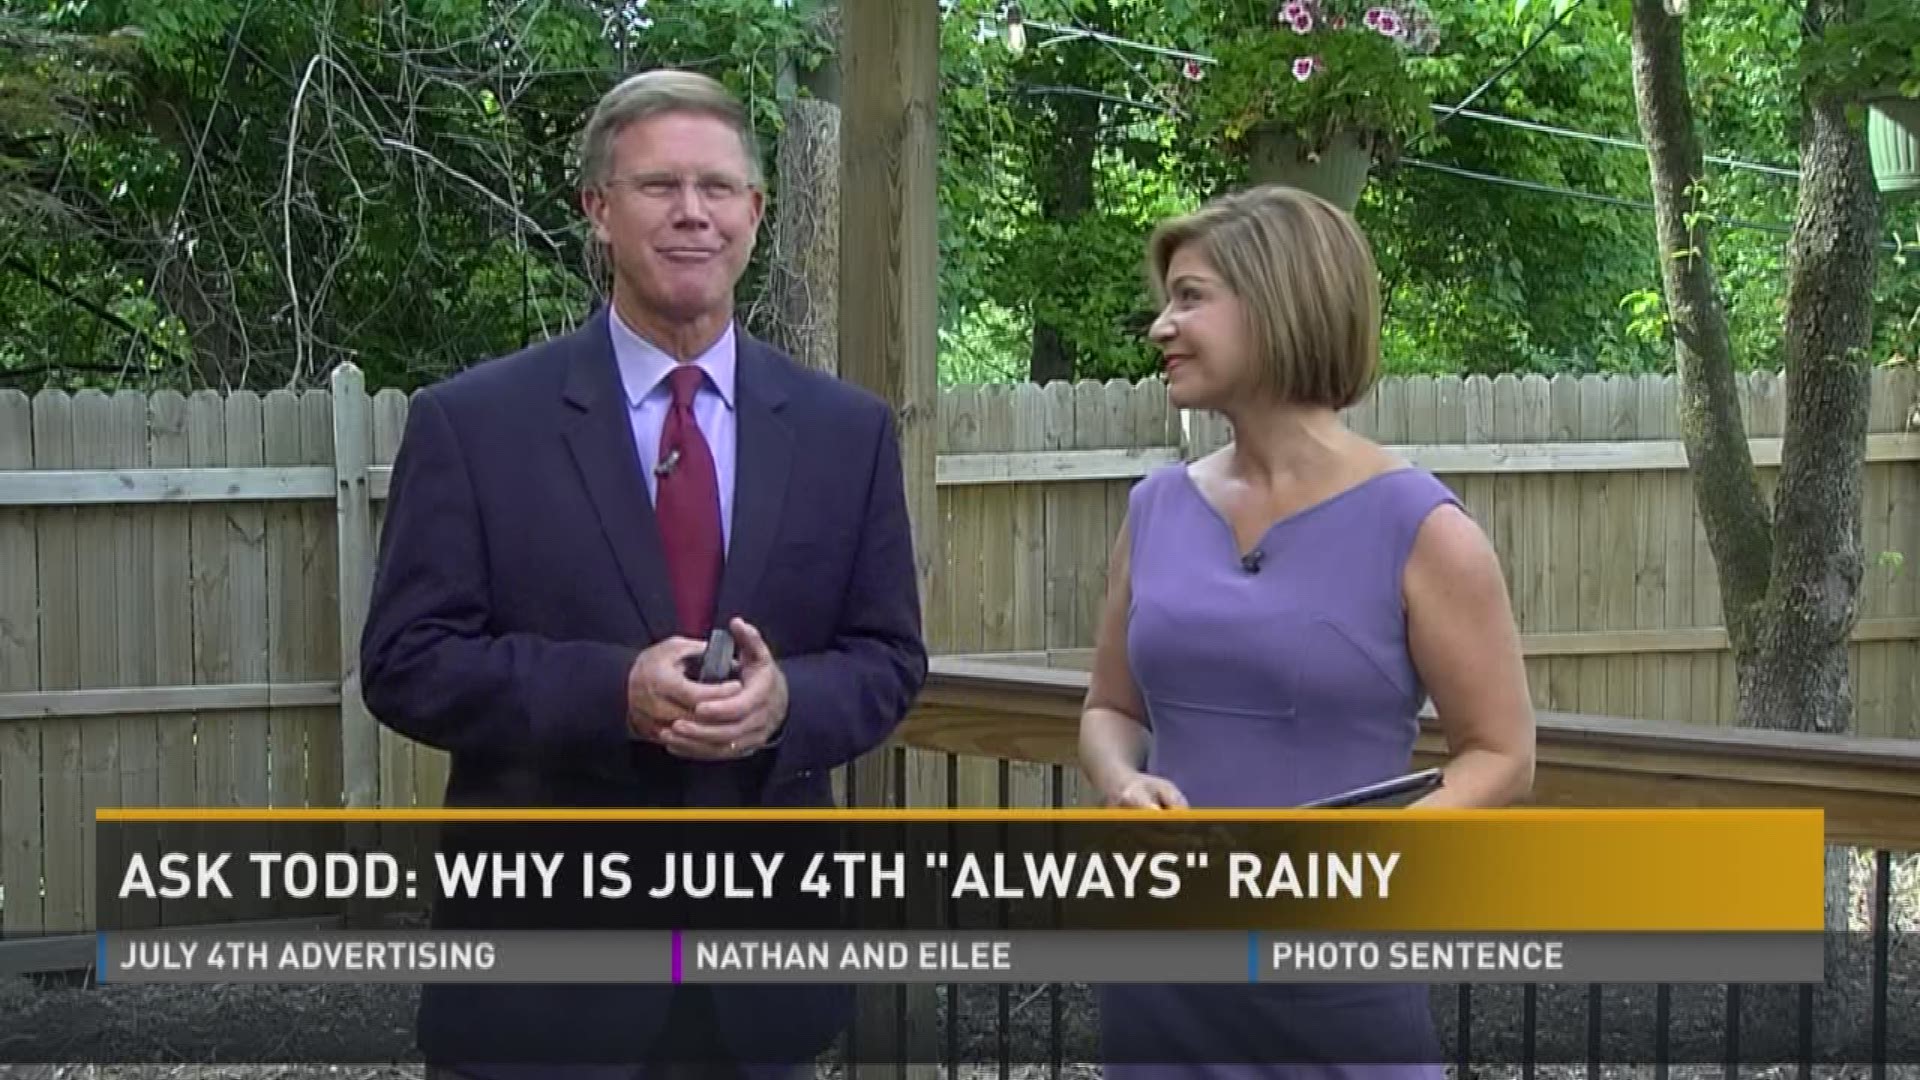 It's actually rained on July 4 in five of the last ten years.